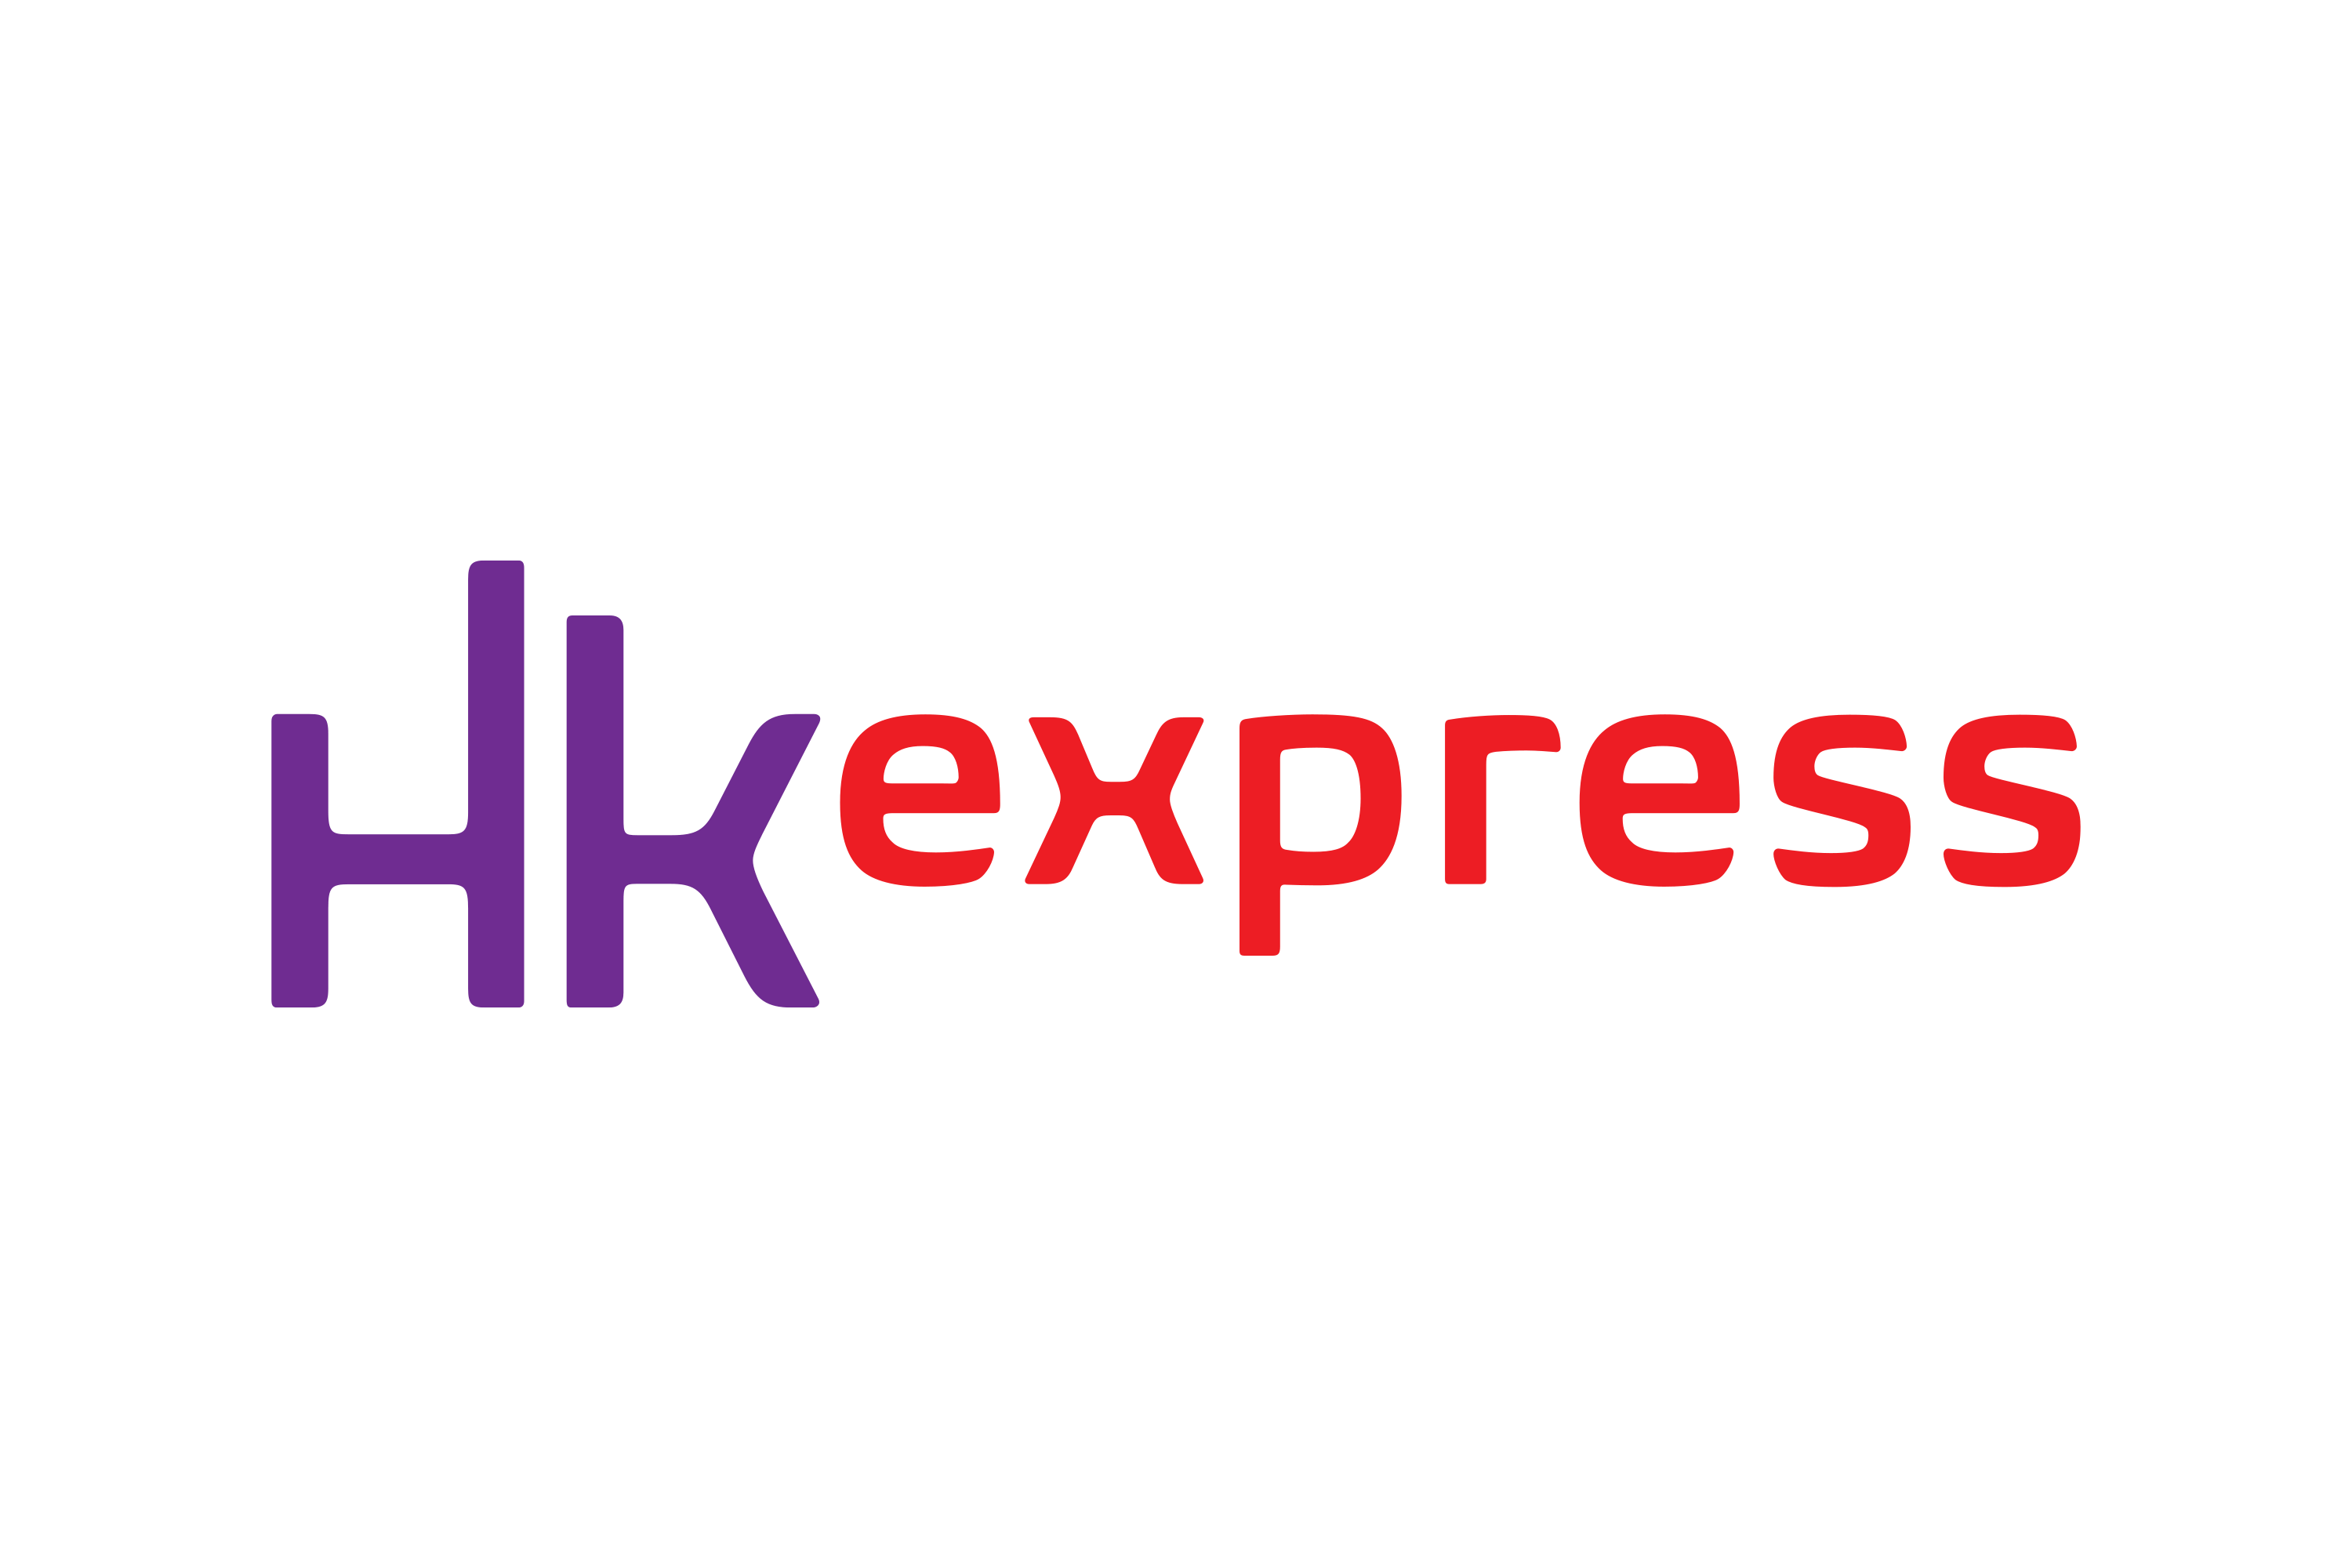 Download HK Express (Hong Kong Express Airways Limited) Logo in SVG Vector  or PNG File Format 